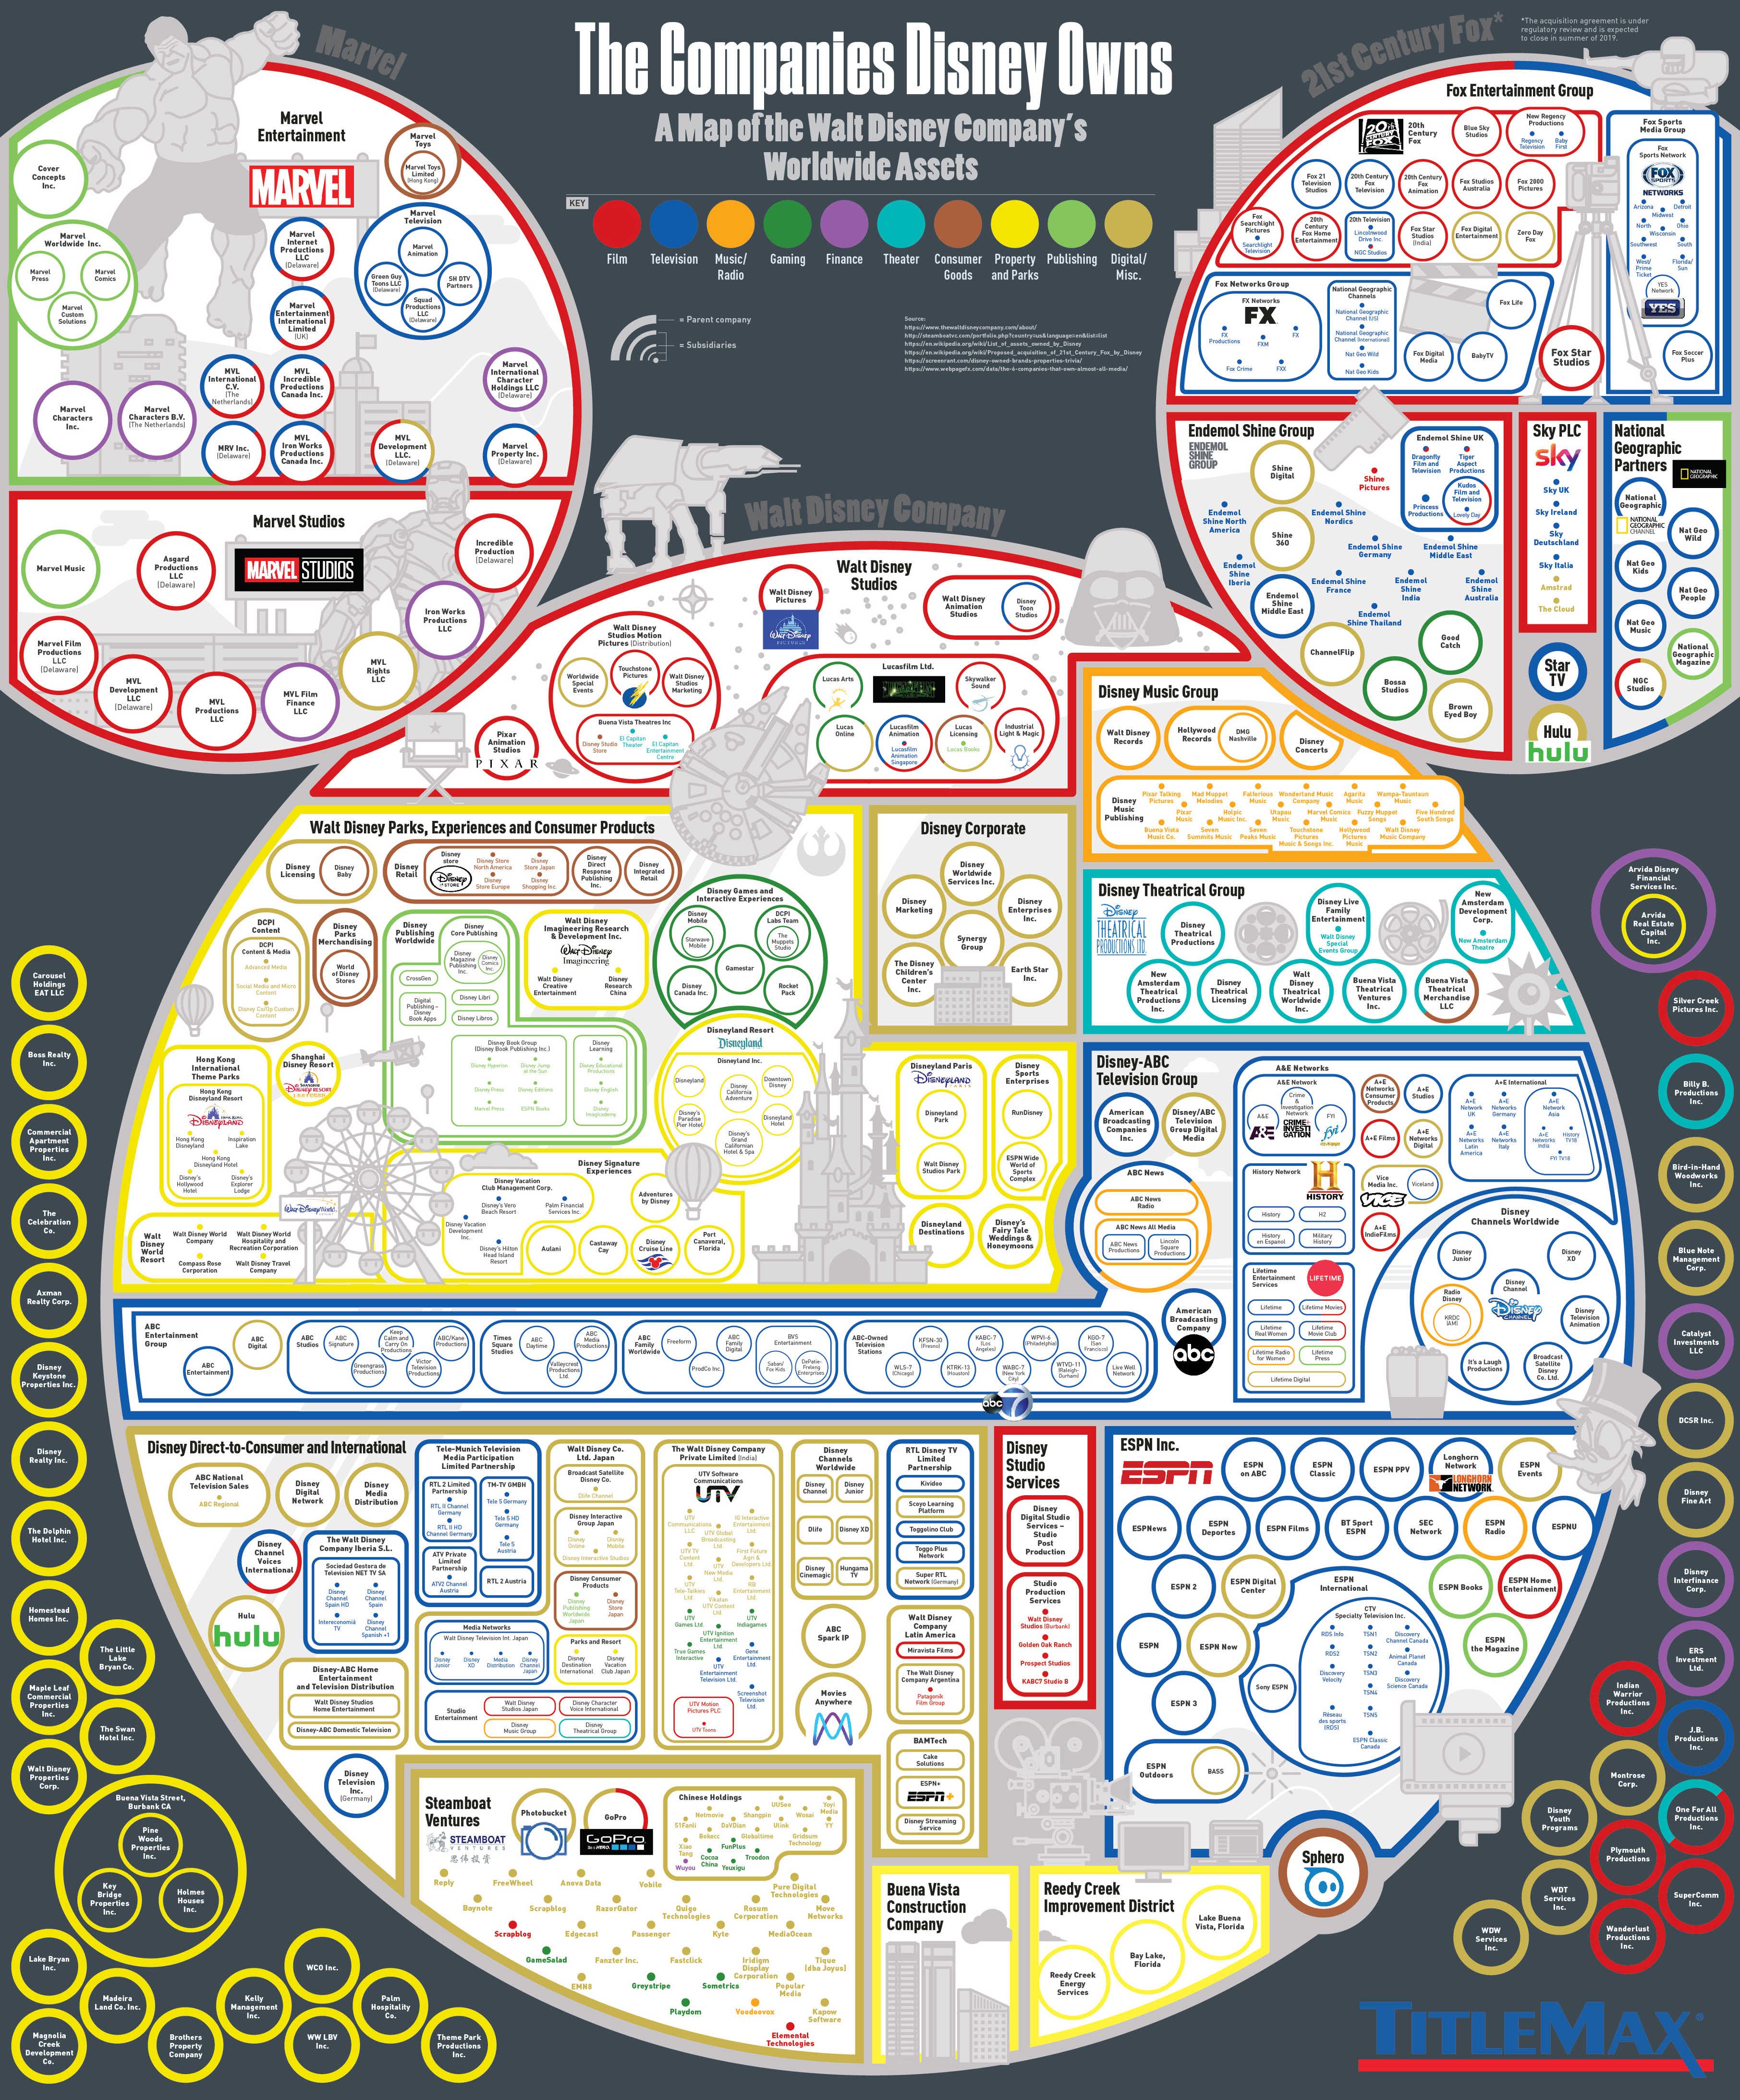 Every Company Disney Owns #Infographic